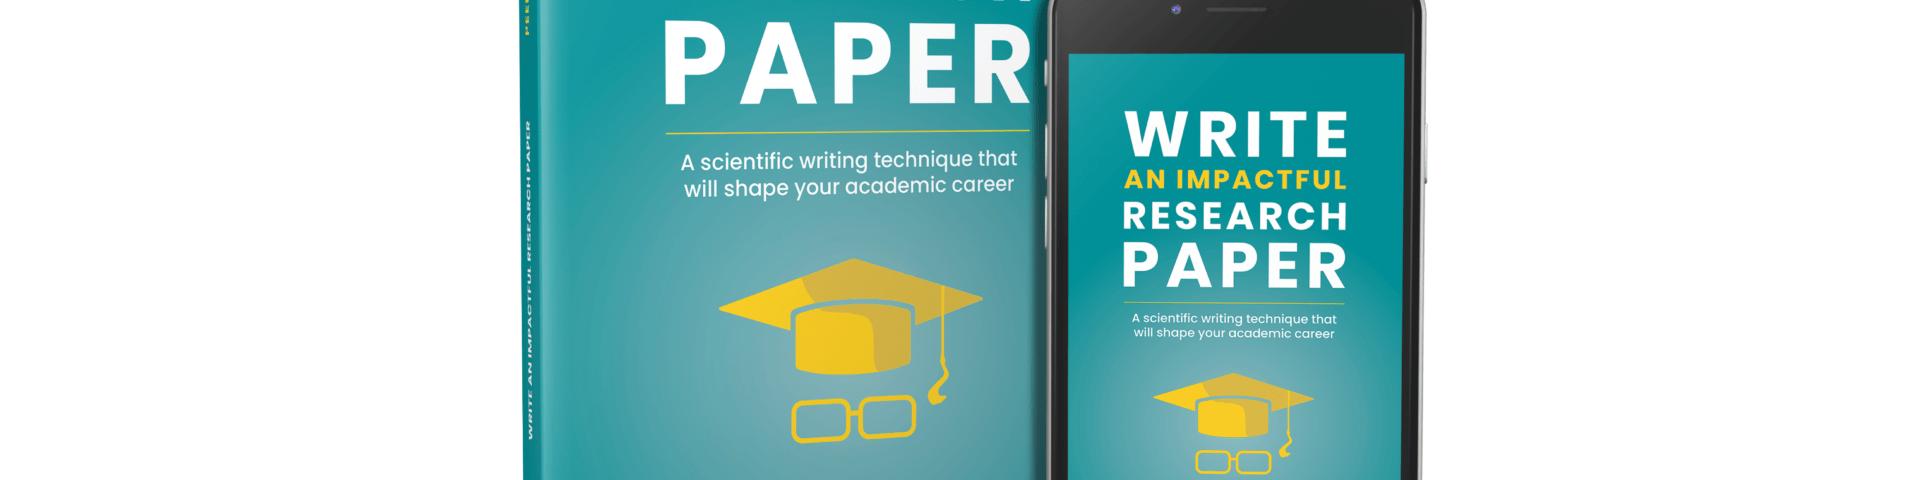 Cover of the book "Write an Impactful Research Paper"